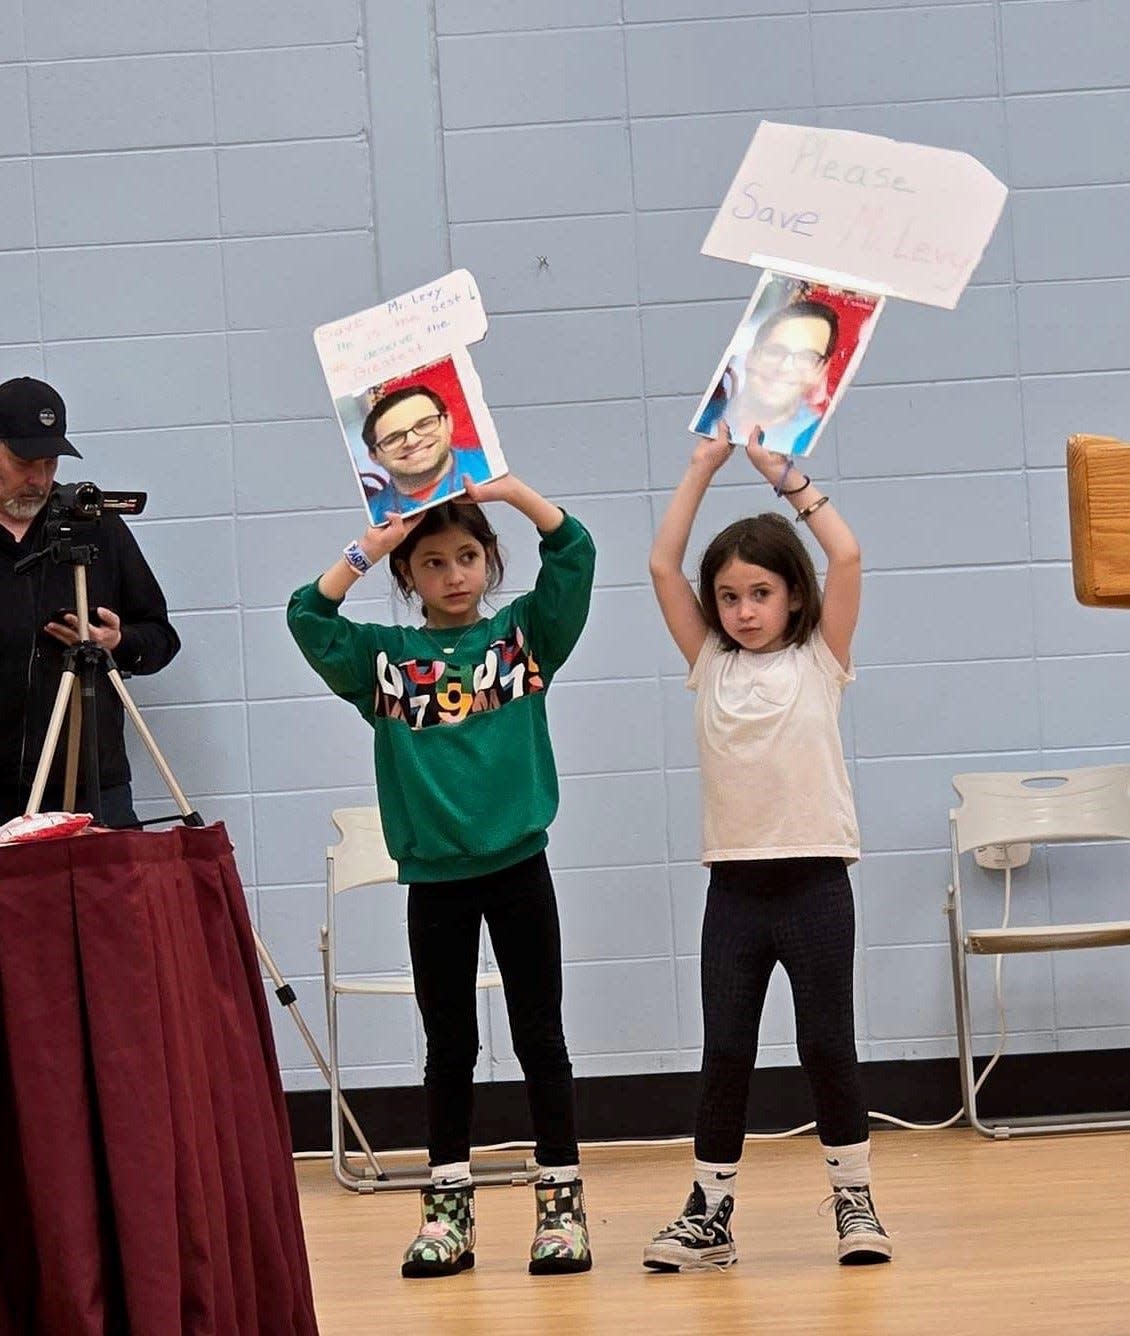 Students from Strathmore Elementary School in Aberdeen hold a signs in support of third-grade teacher Josh Levy at the May 6 Matawan-Aberdeen Board of Education meeting.